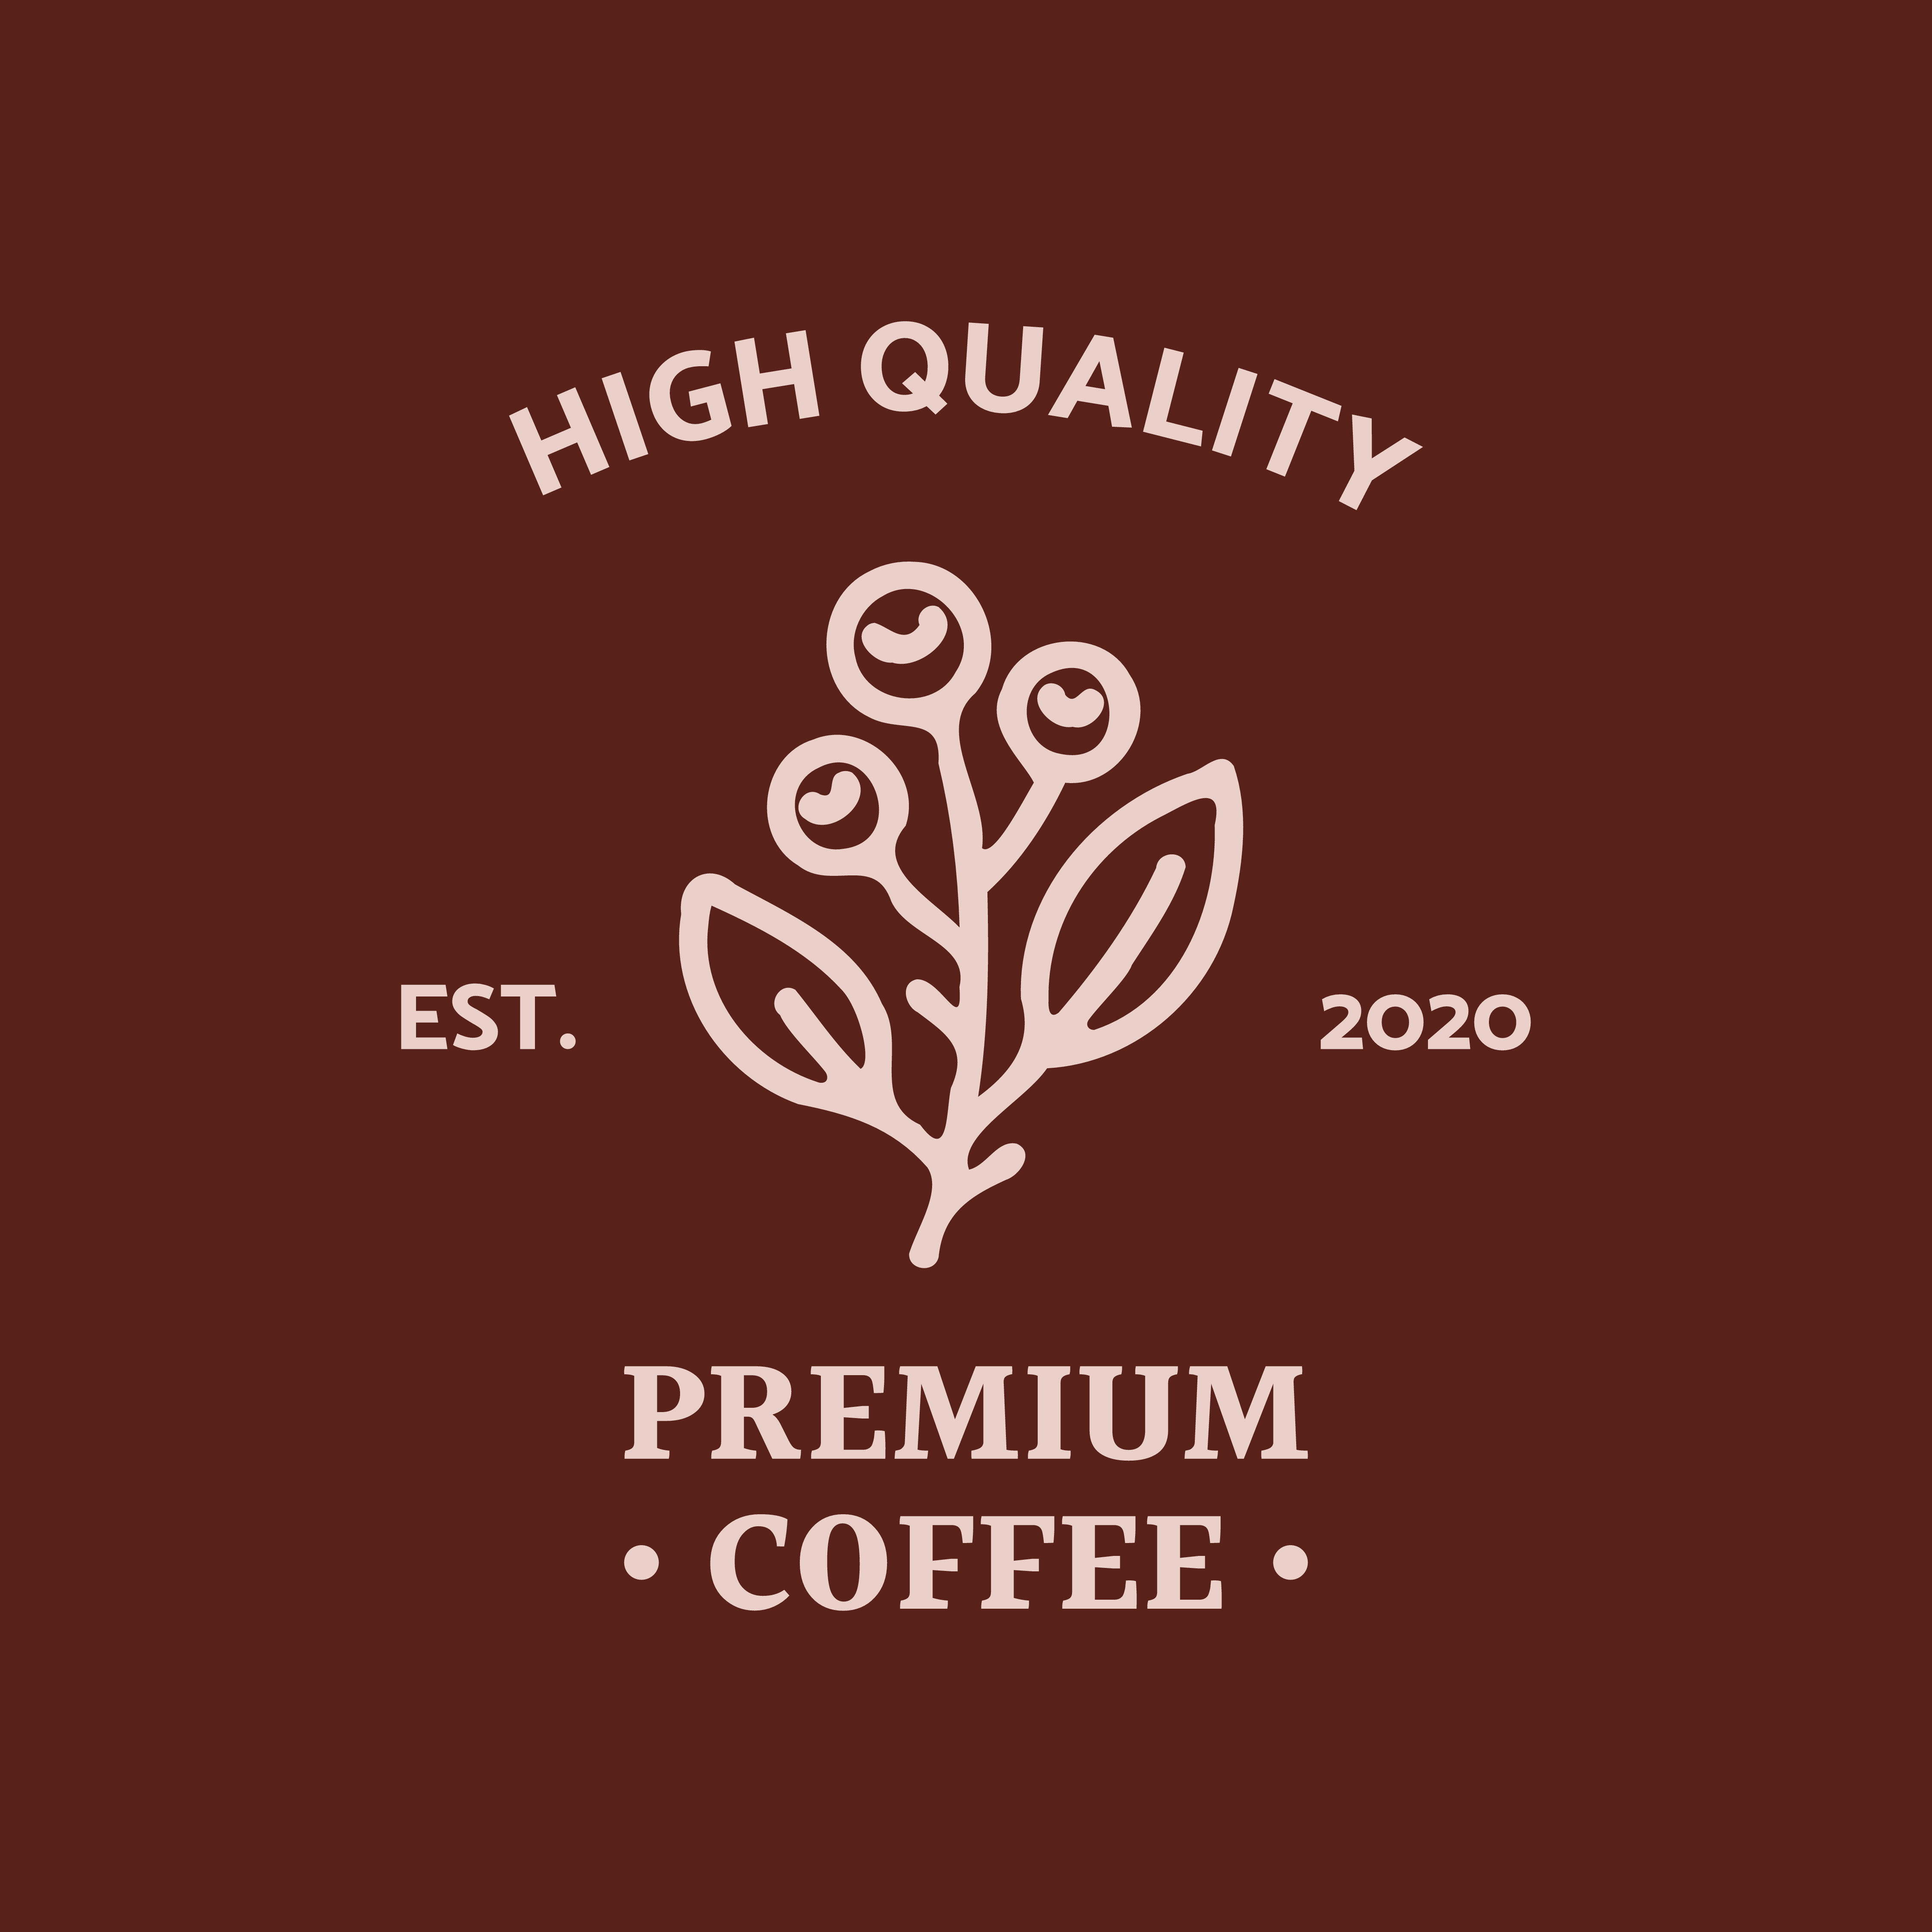 Download coffee shop logo template vector for premium coffee ...